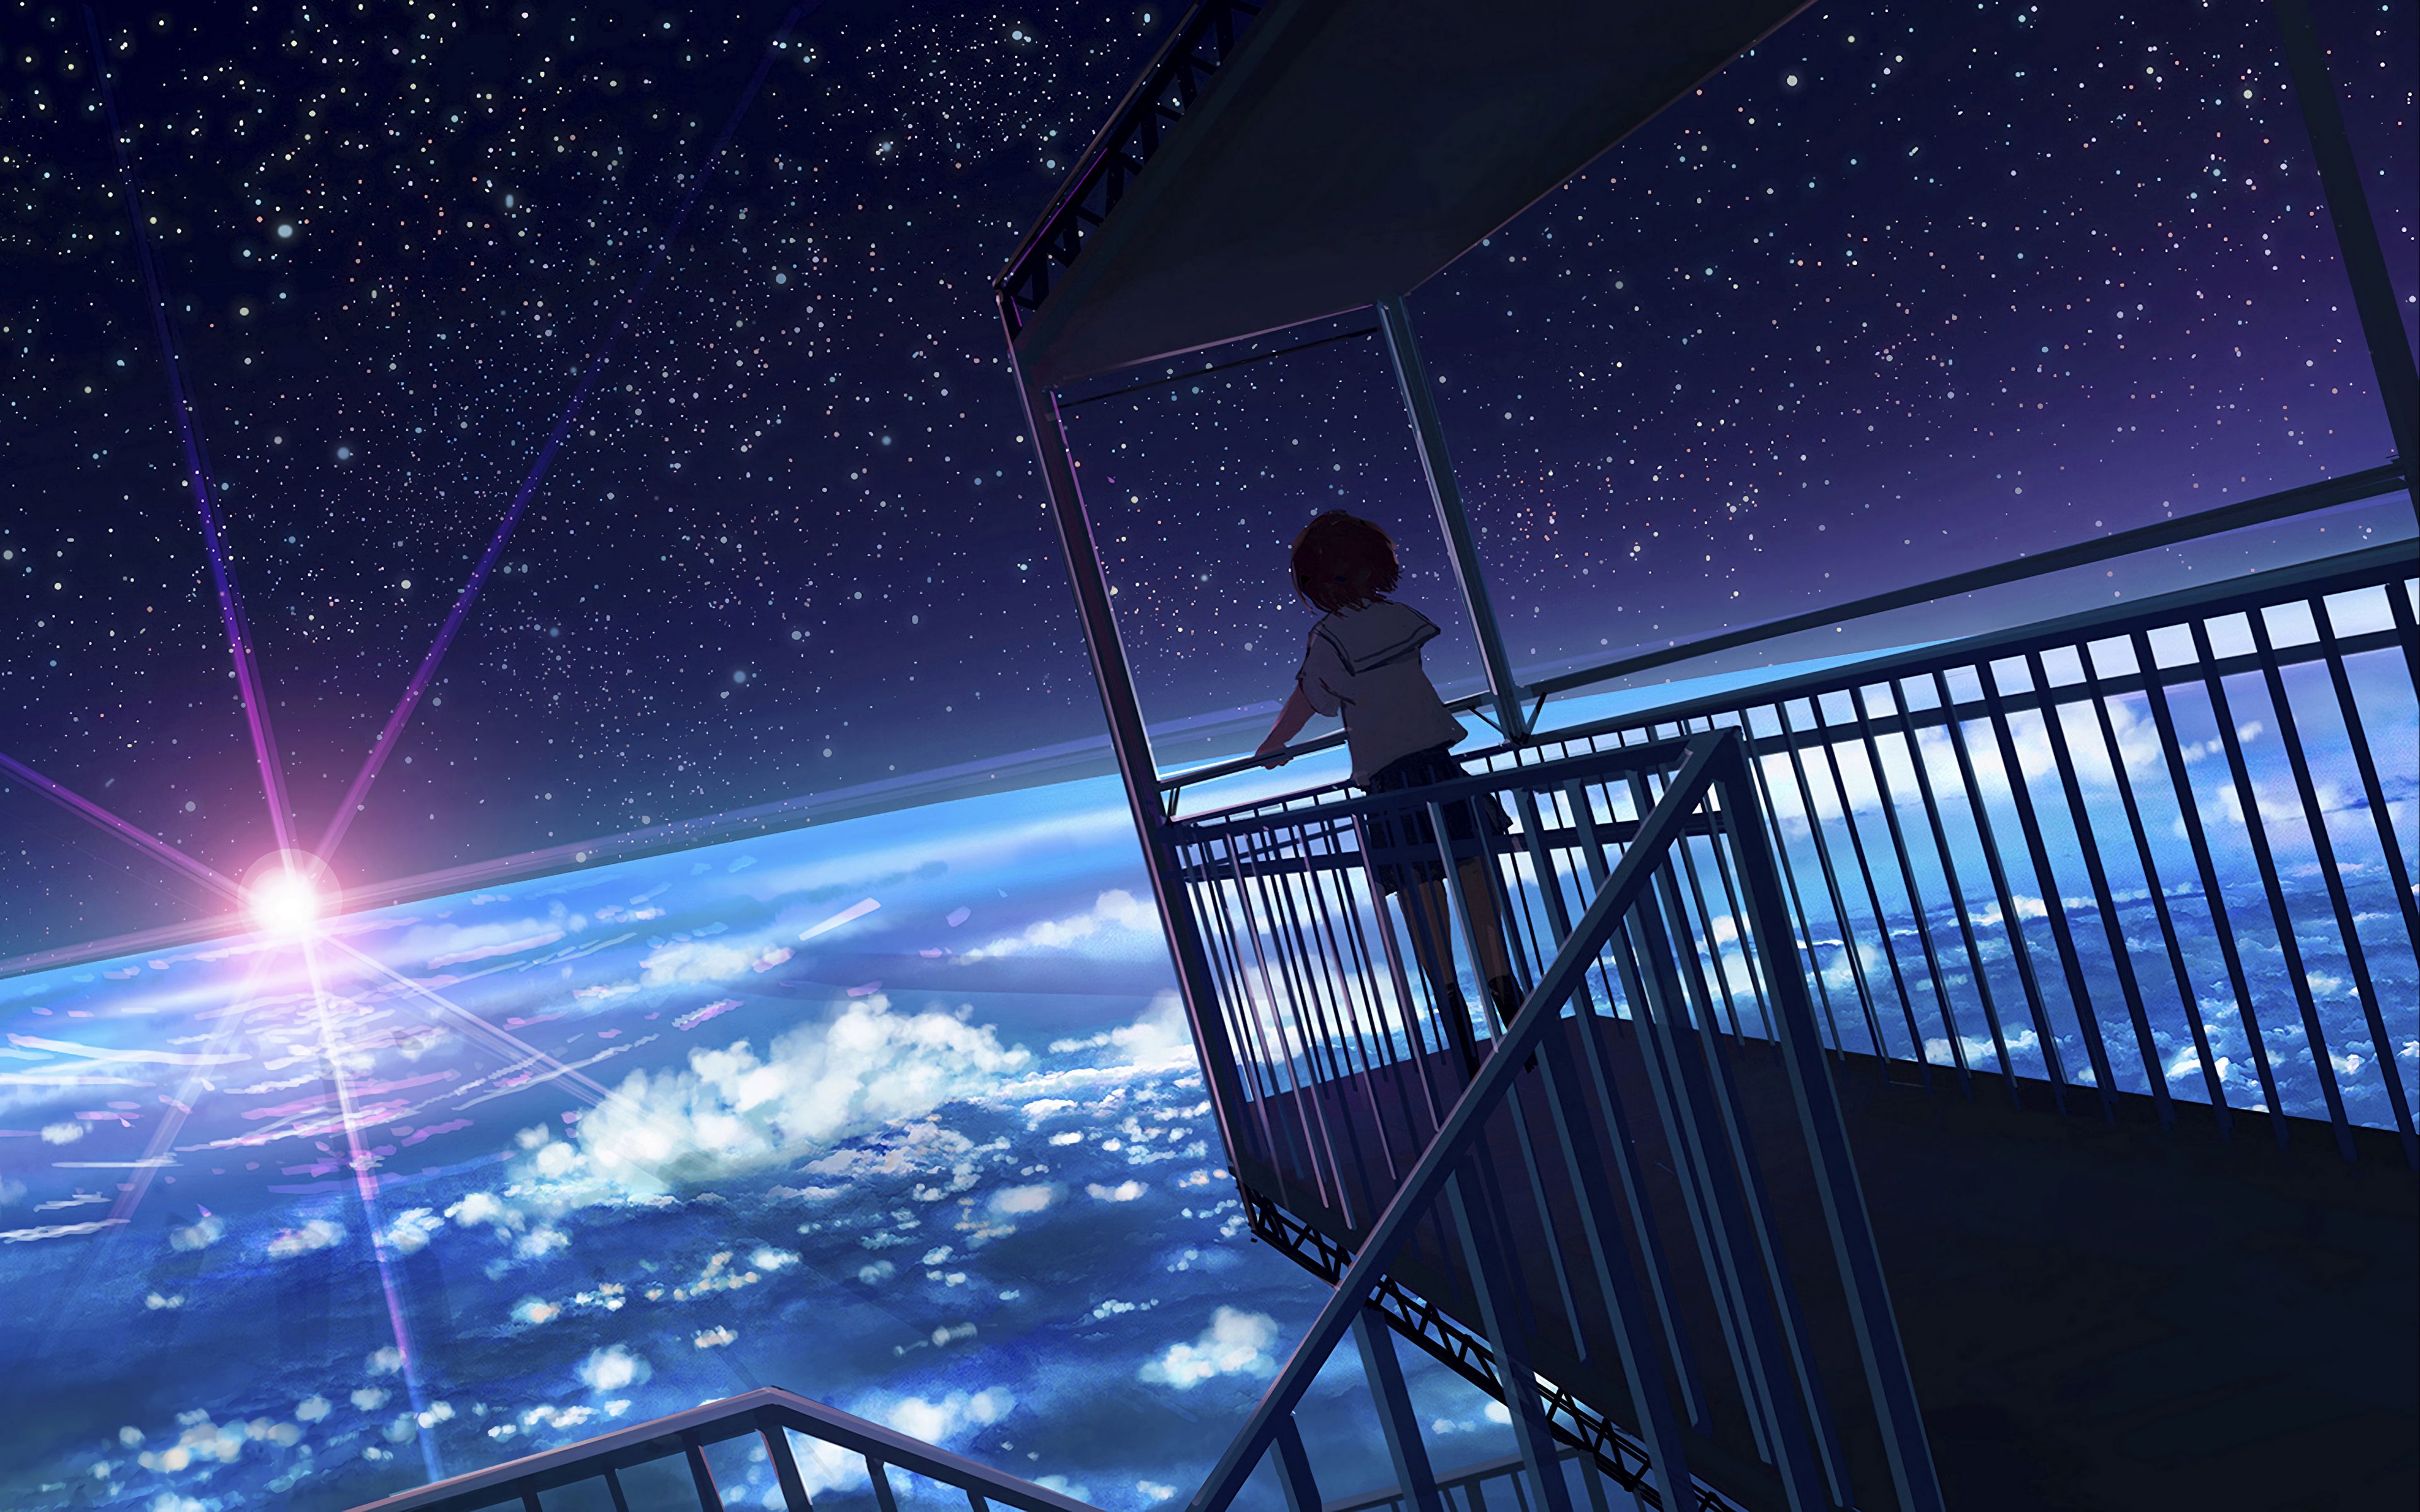 Download wallpaper 3840x2400 girl, form, view, earth, space, anime 4k ultra HD 16:10 HD background